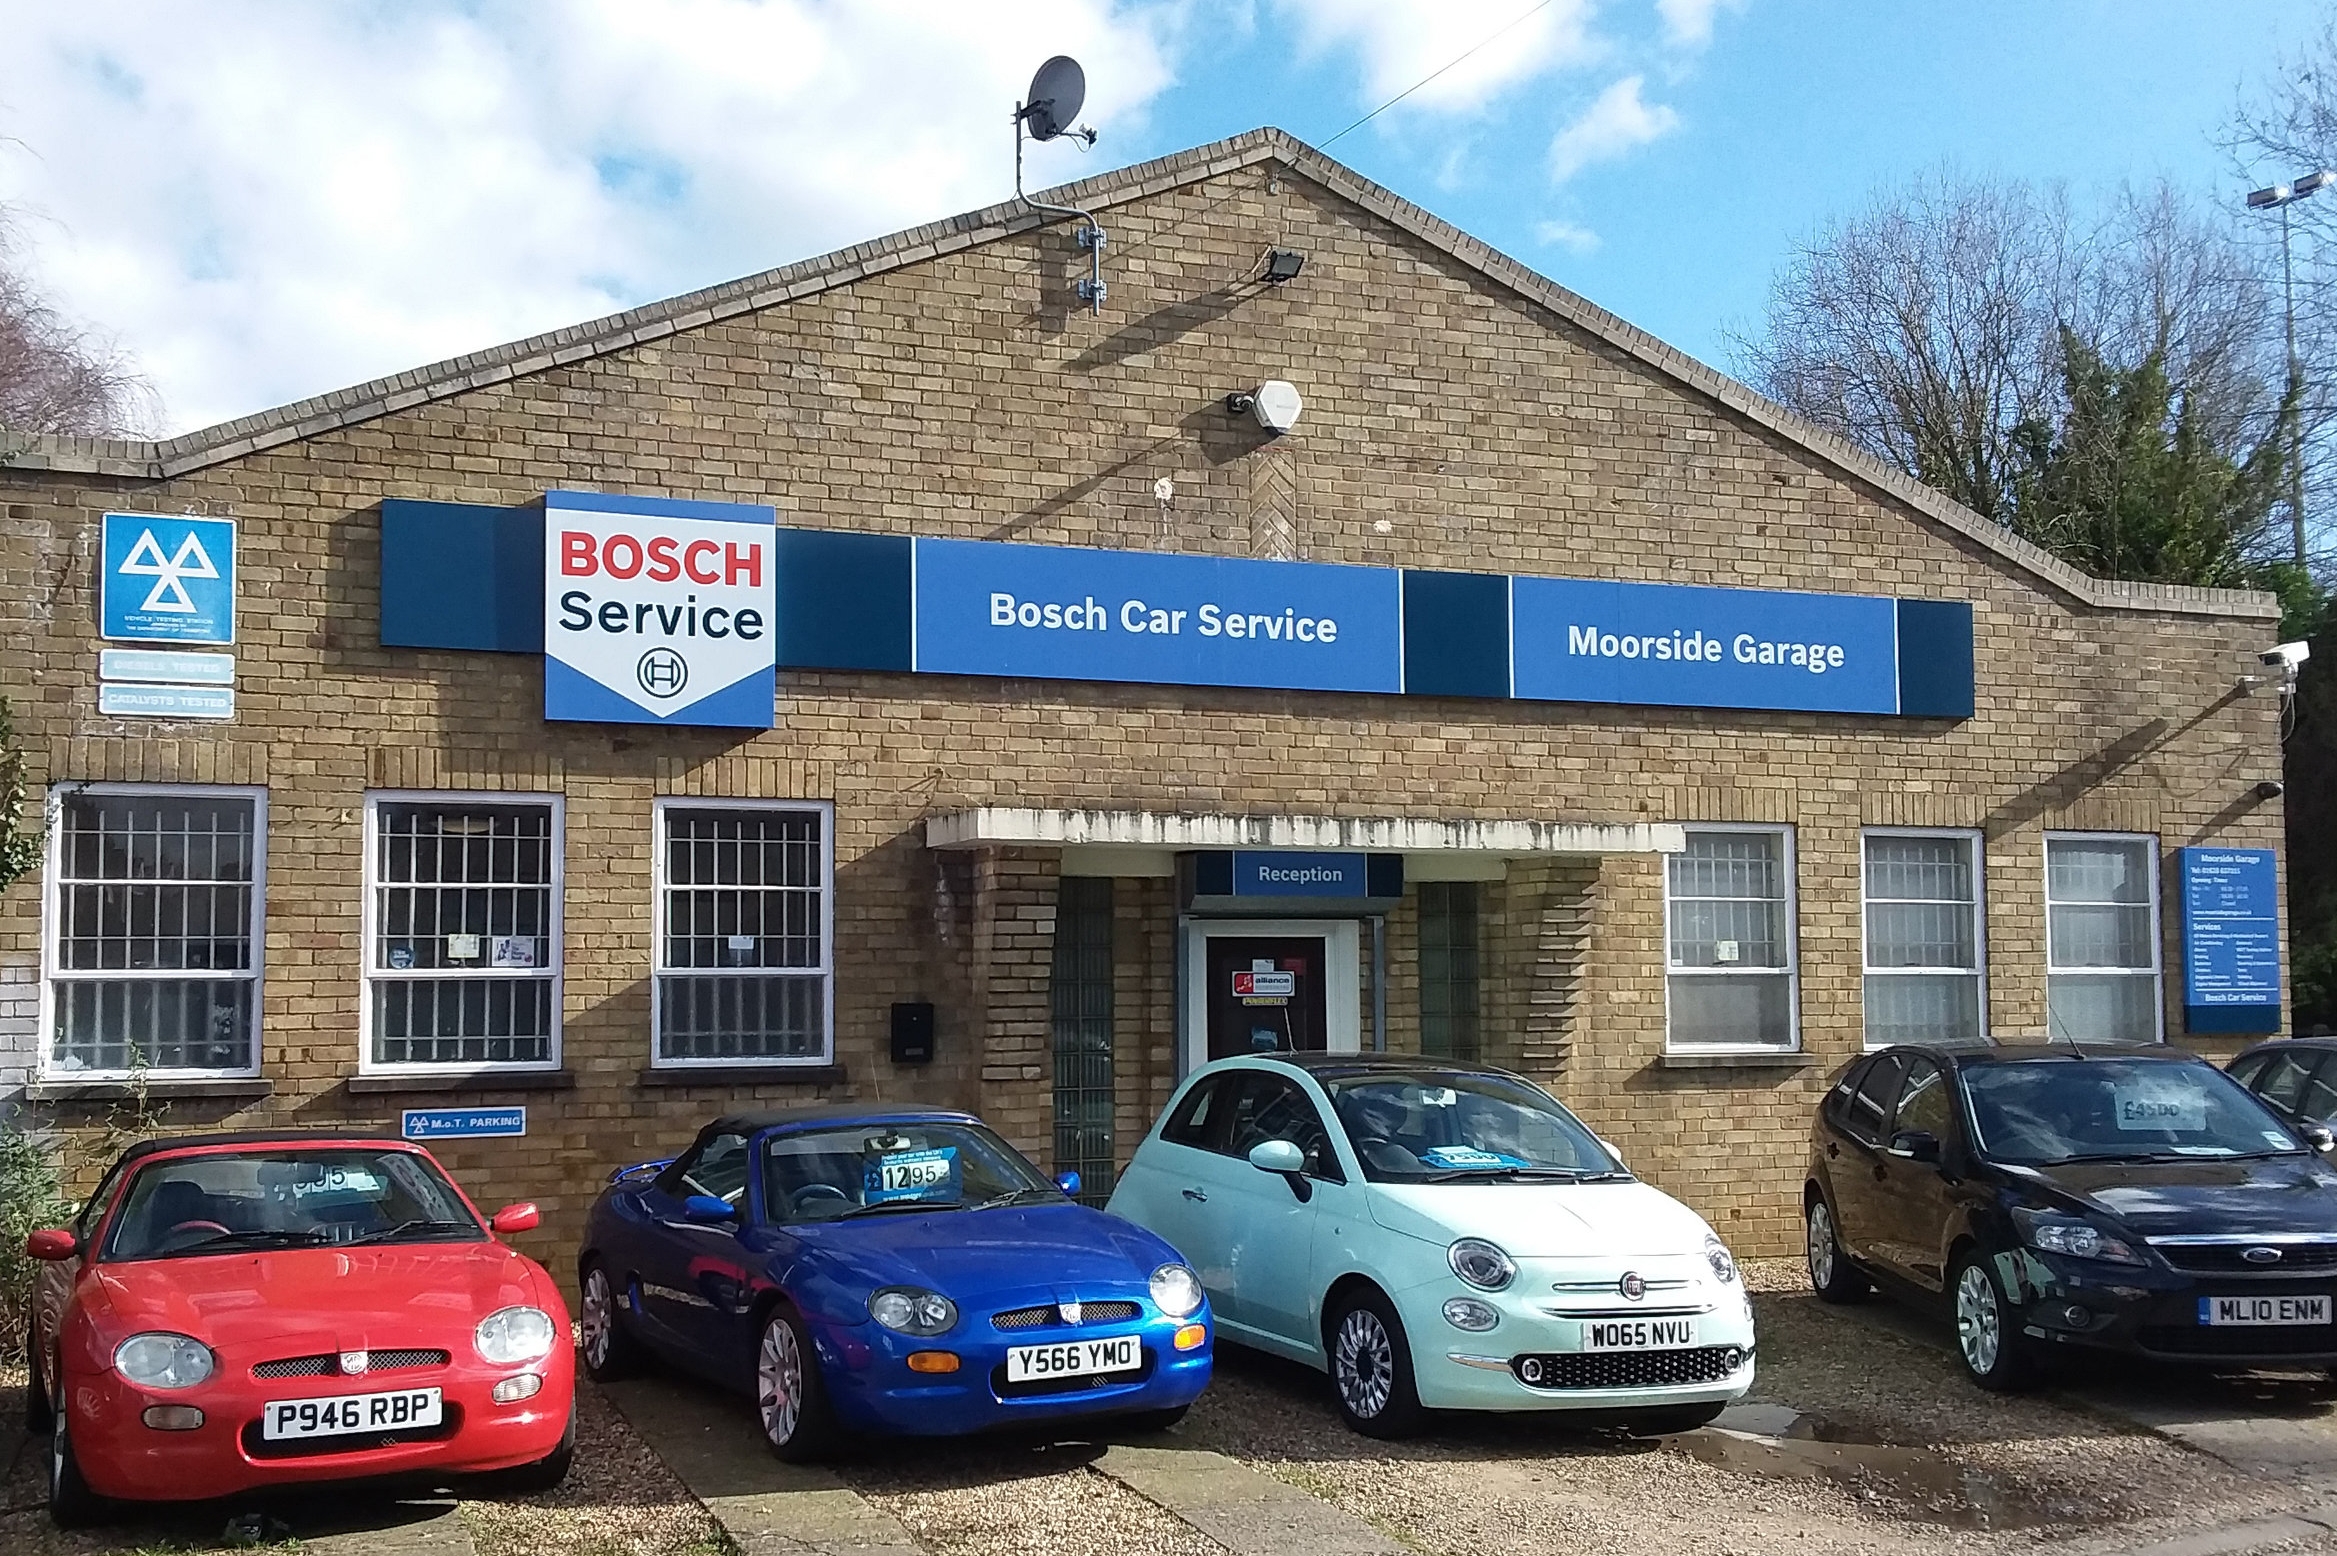 Moorside Garage in Maidenhead, is proud to be a selected Partner Garage of the EasyCarCare Network